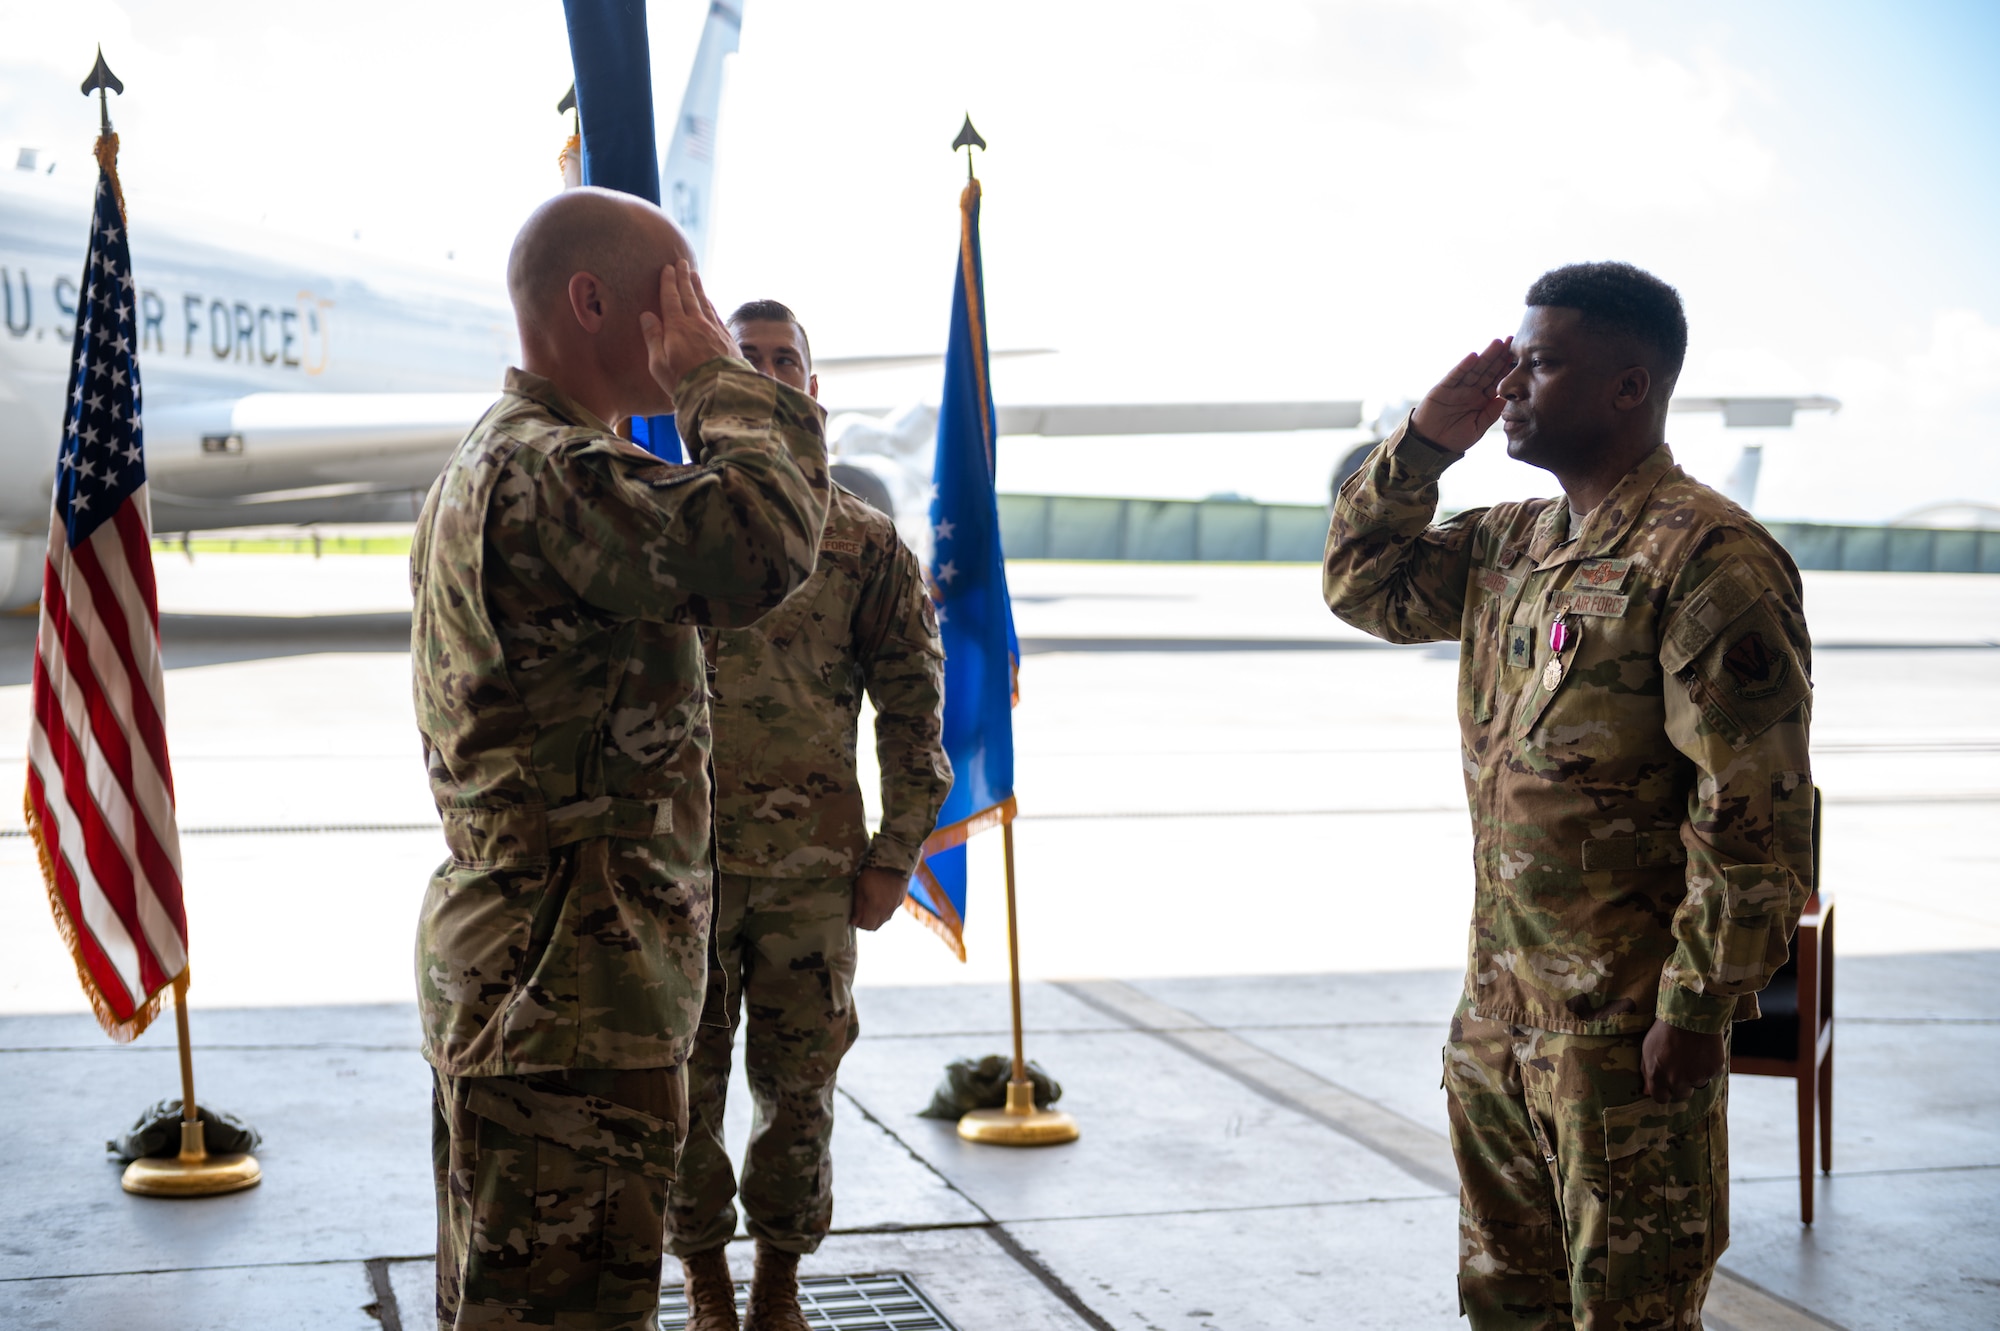 U.S. Air Force Lt. Col. Joseph Hayes Jr. (right), renders his final salute as the 5th Expeditionary Airborne Command and Control Squadron commander to U.S. Air Force Col. Henry Schantz, 18th Operations Group commander, during the 5th EACCS deactivation ceremony